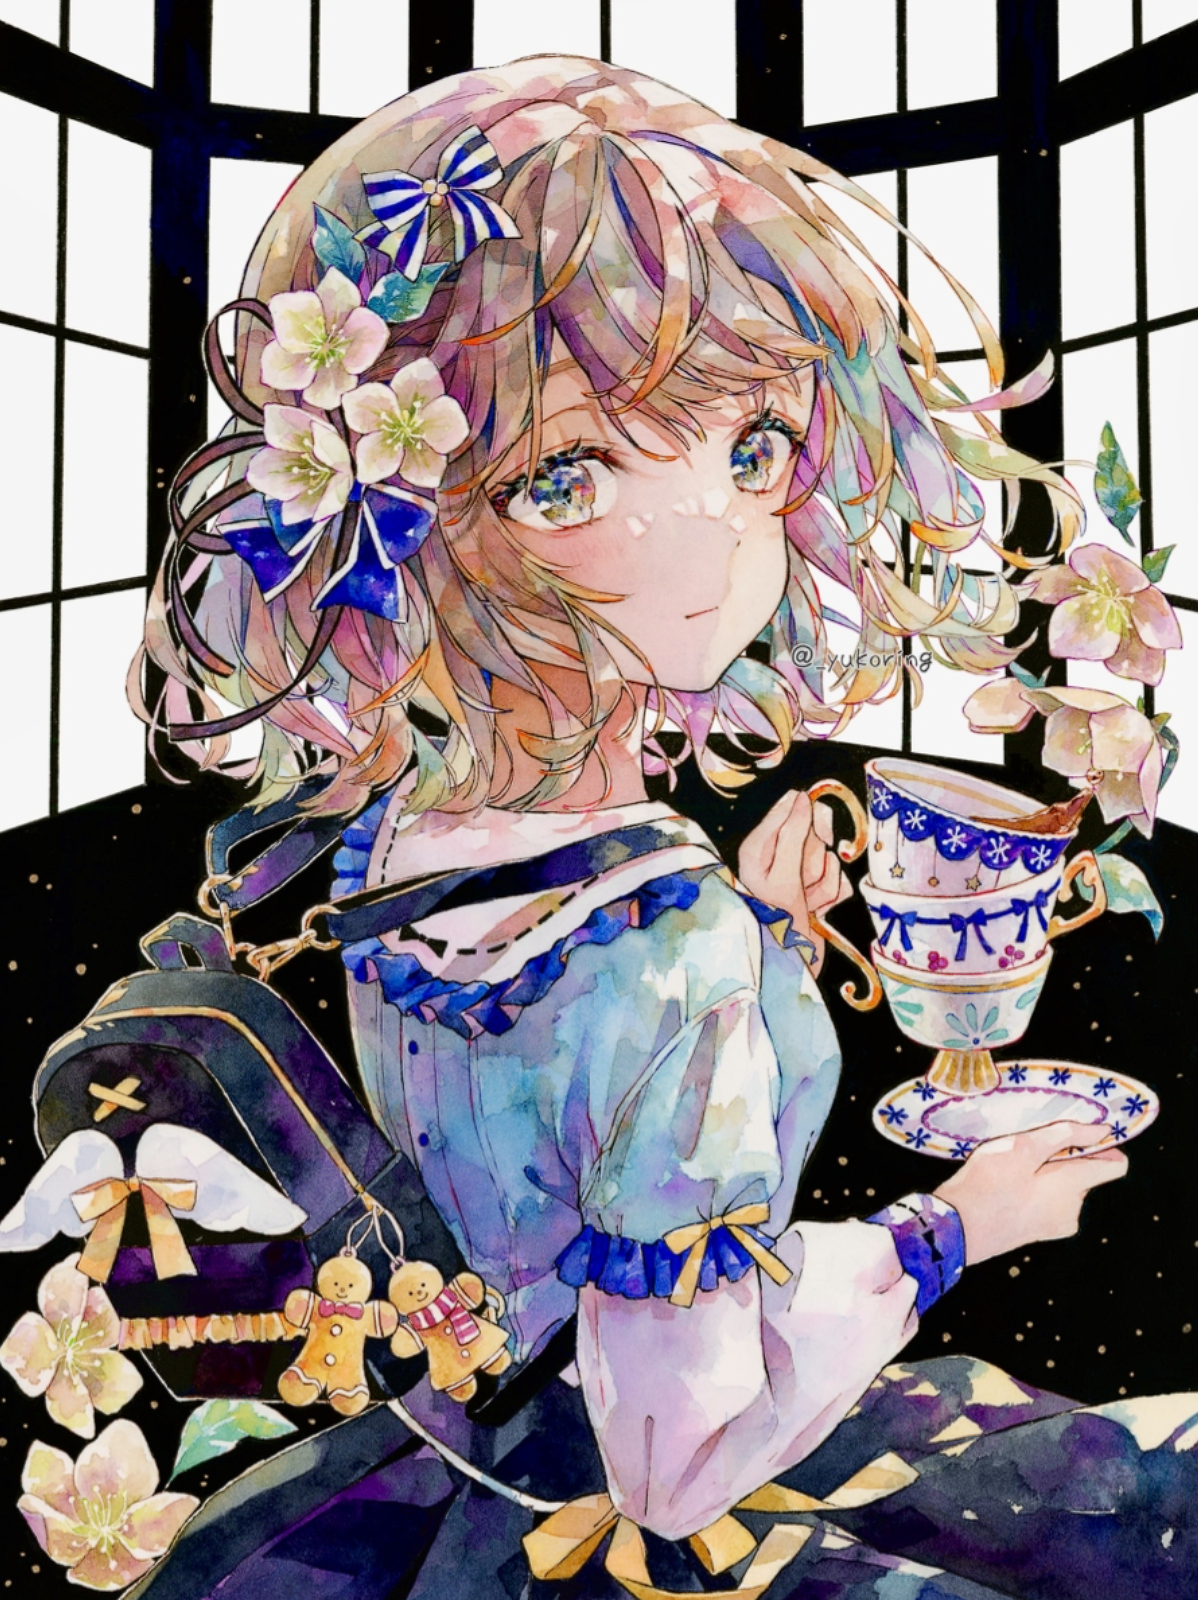 Anime 1198x1600 anime anime girls watercolor Yukoring watercolor style tea backpacks ribbon flowers short hair artwork hair ornament portrait display plates looking at viewer cup flower in hair dress multi-colored hair drink gingerbread man bow tie